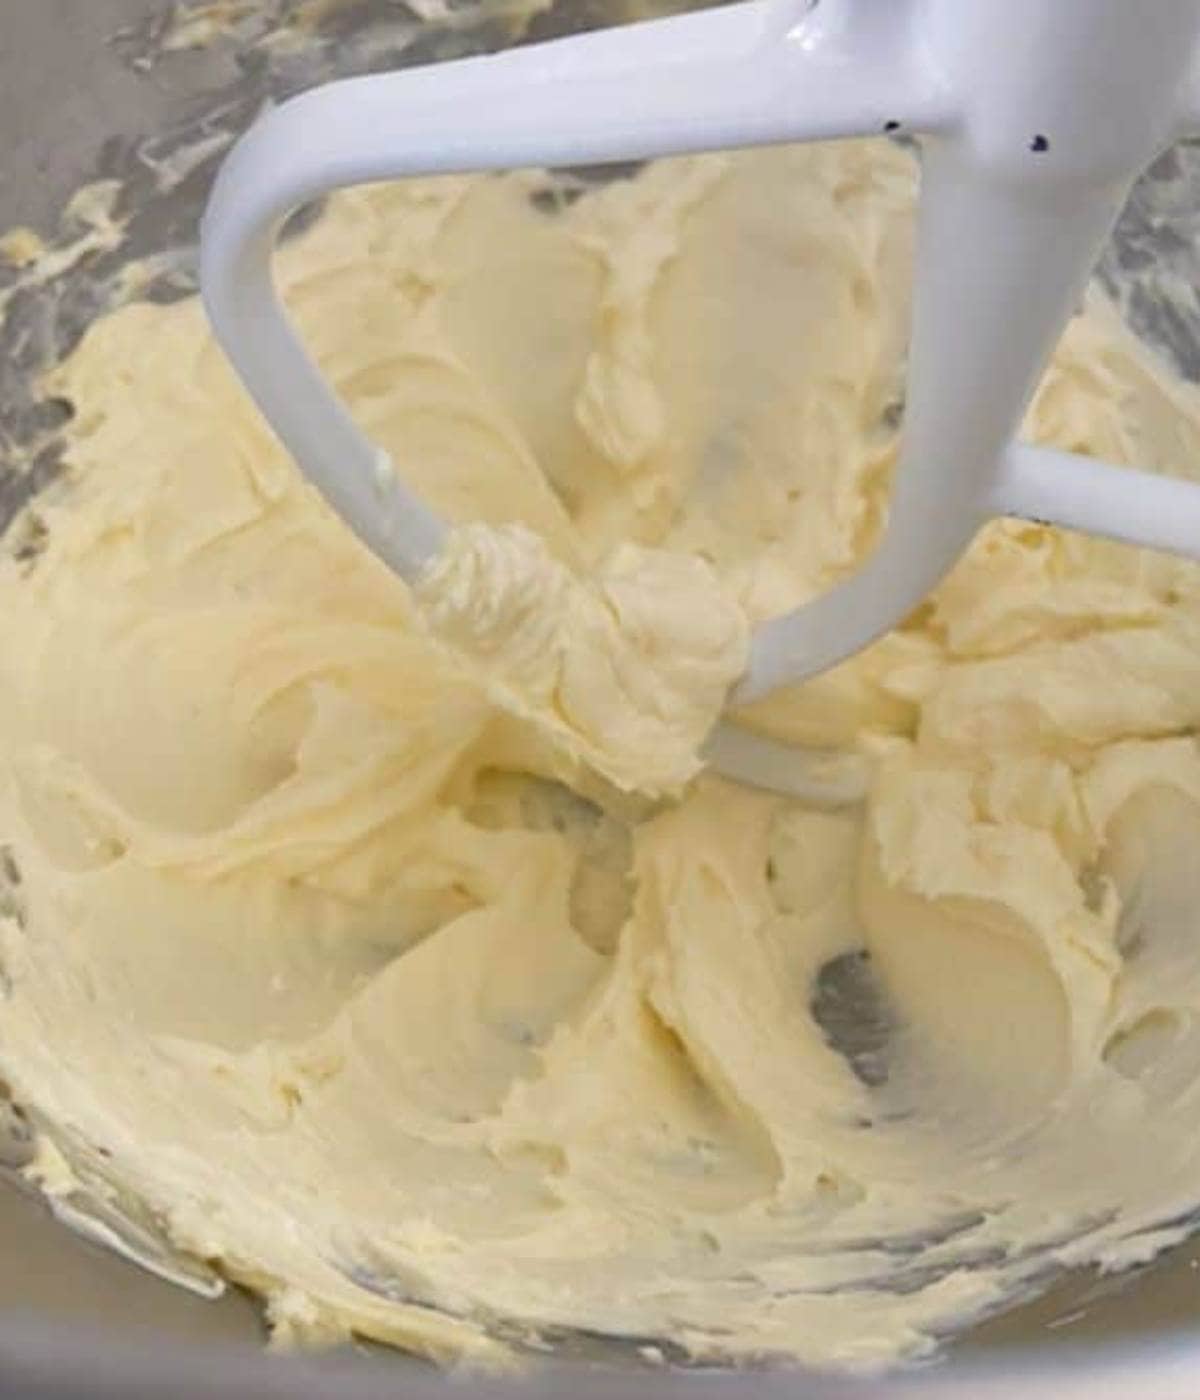 Cream cheese beating in stand mixer.